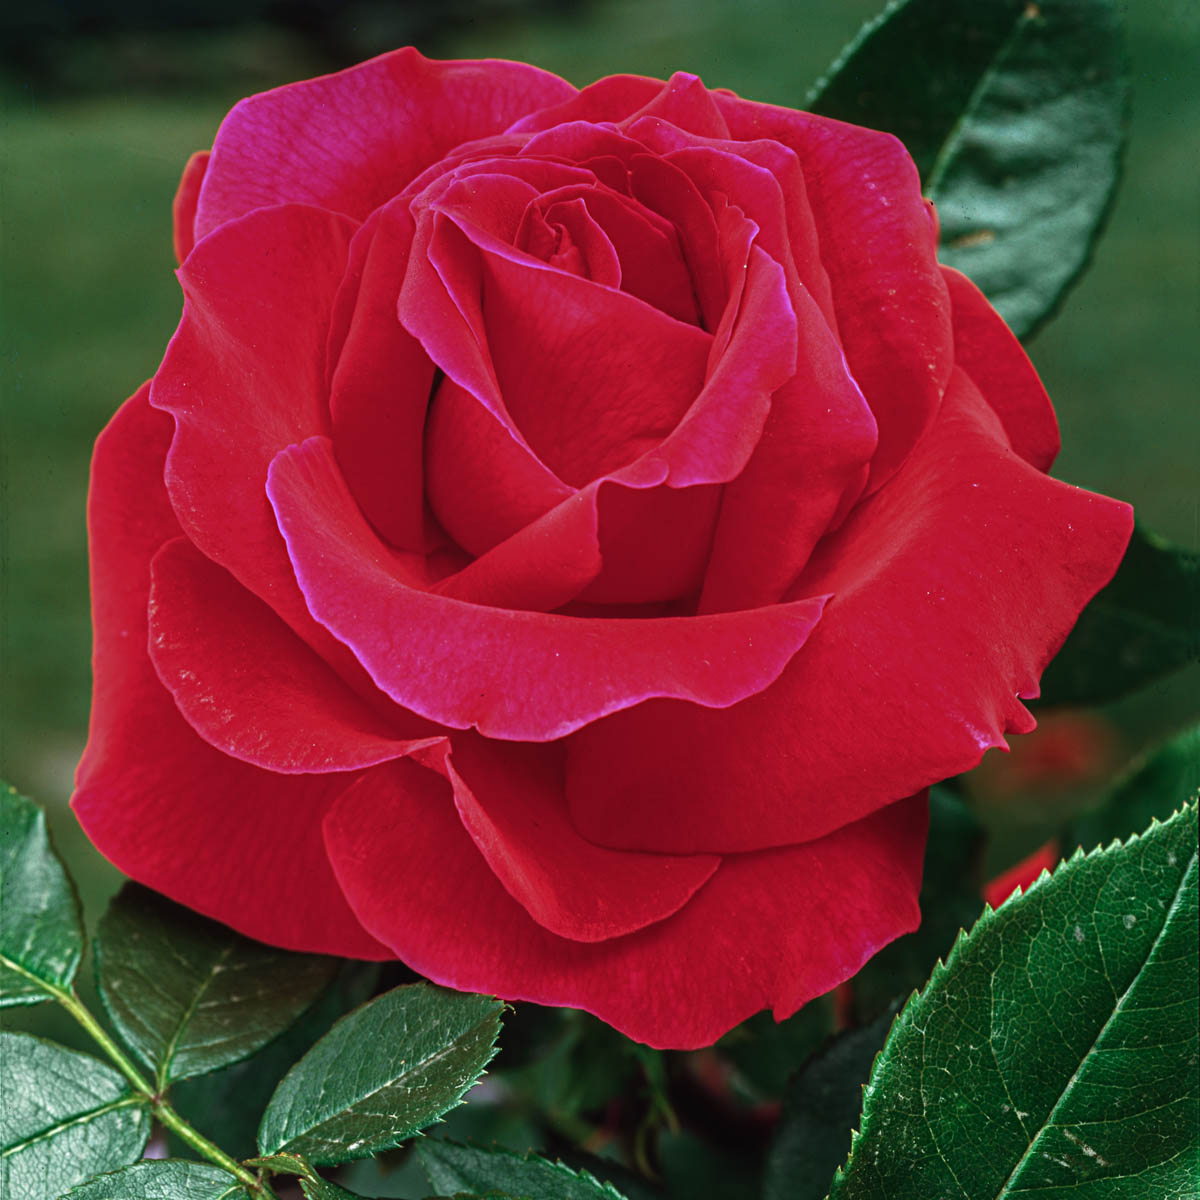 Mister Lincoln Hybrid Tea Rose, 3 Gallon Potted Potted Flowering Plant (1-Pack) - image 1 of 3